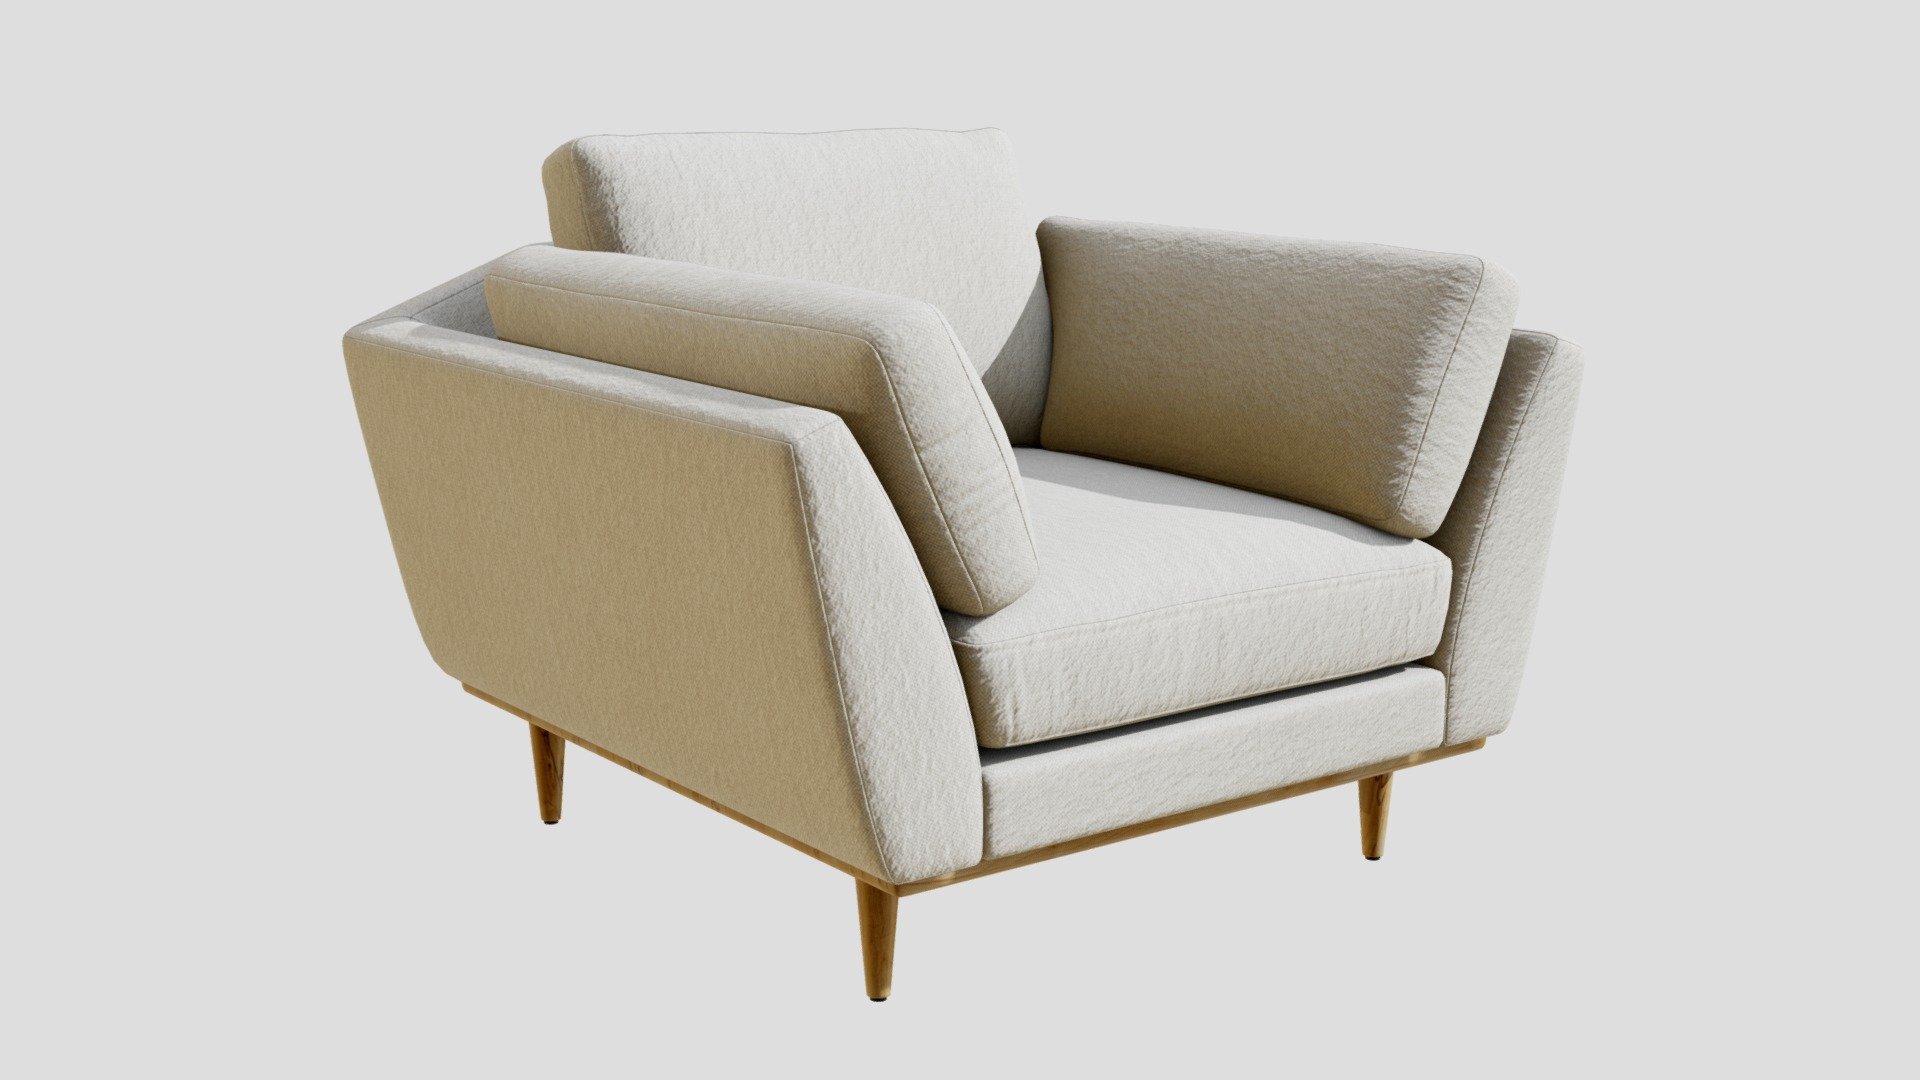 High-quality 3d model of a Crate and Barrel Hague Mid-Century Accent Chair

Original: https://www.crateandbarrel.com/hague-mid-century-accent-chair/s471078

14224 polygons
14310 vertices - Crate&Barrel Hague Armchair - Buy Royalty Free 3D model by 3detto 3d model